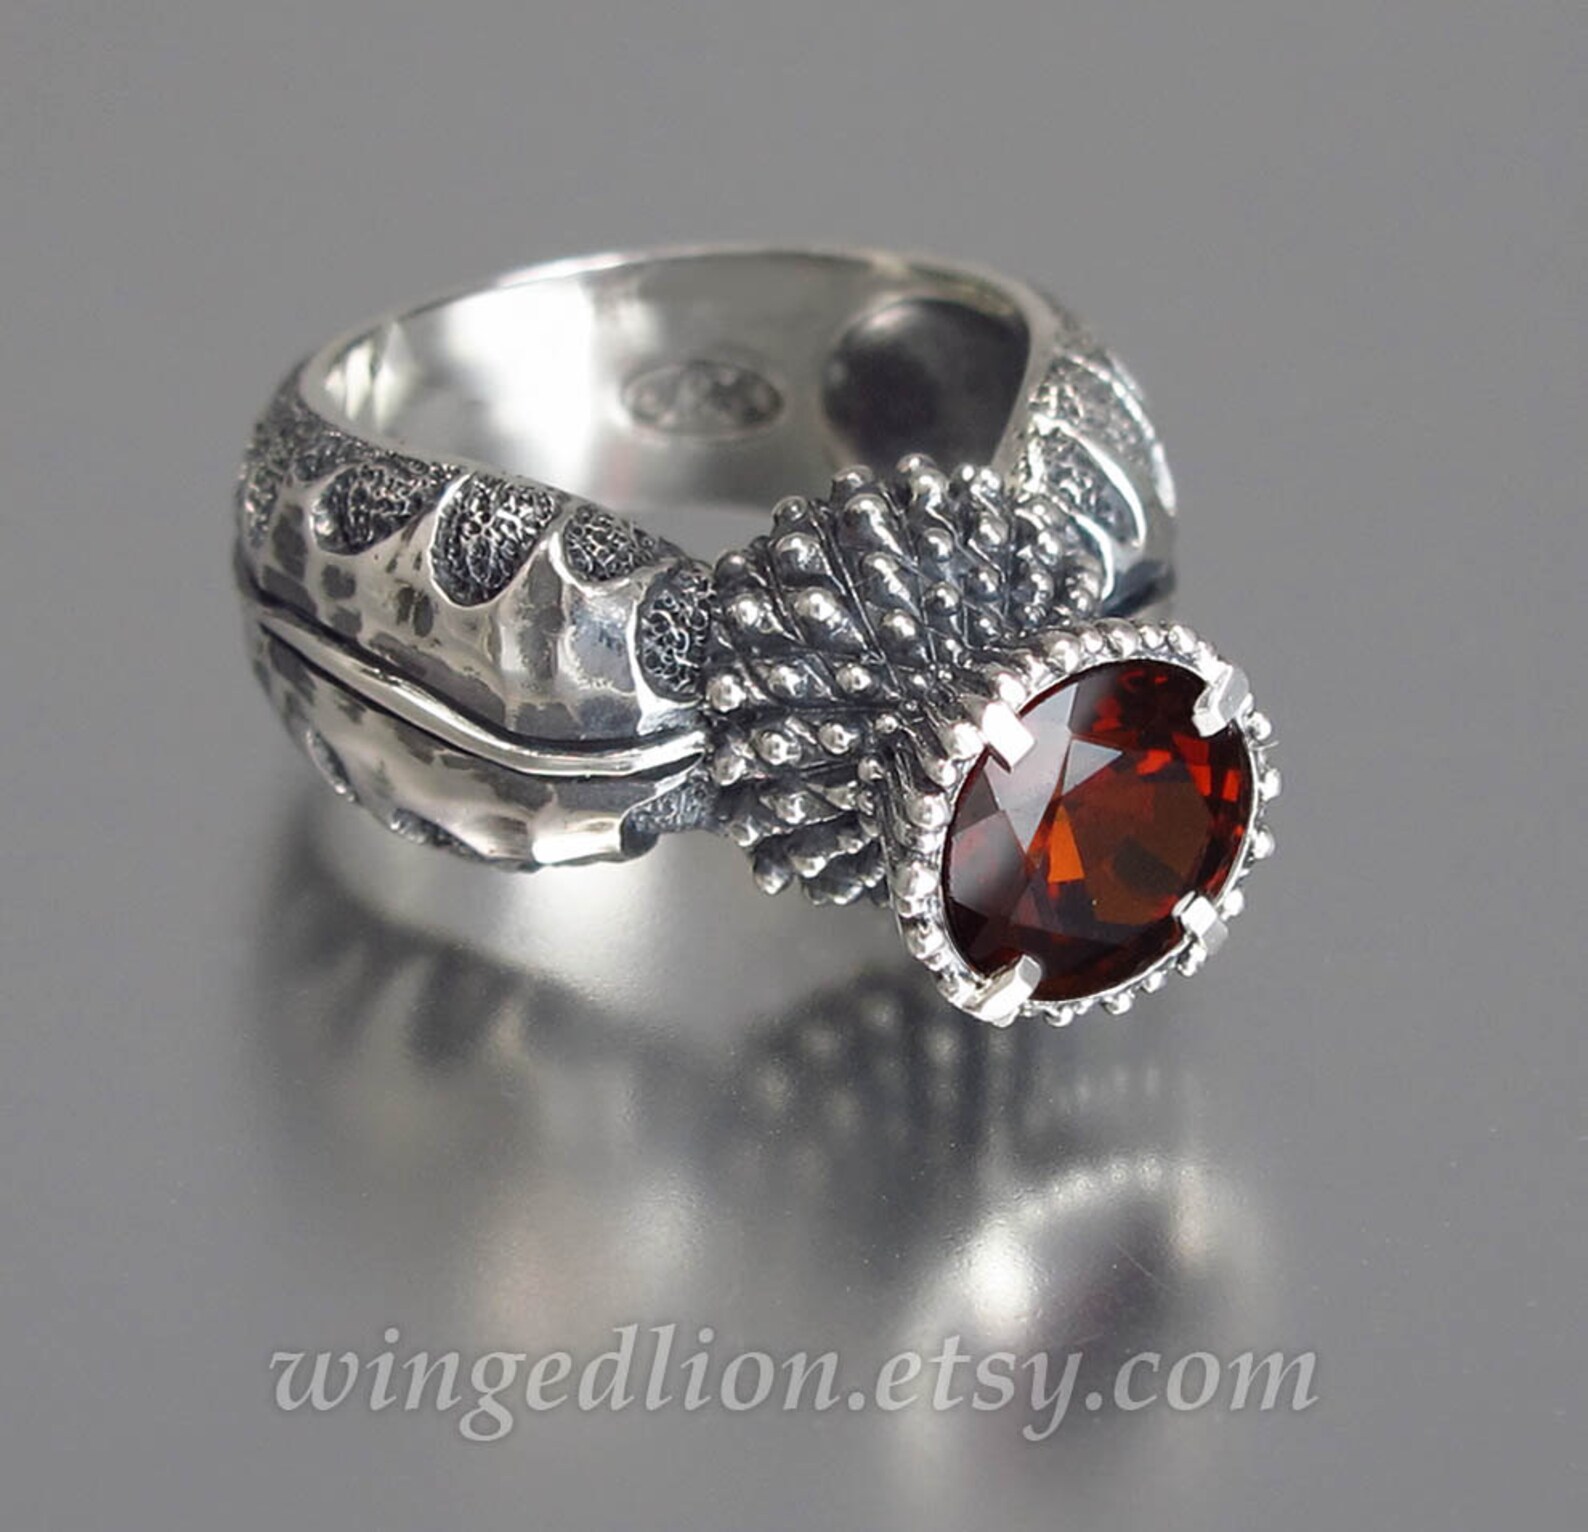 BLOOMING THISTLE Sterling Silver Ring and Wedding Band Set - Etsy